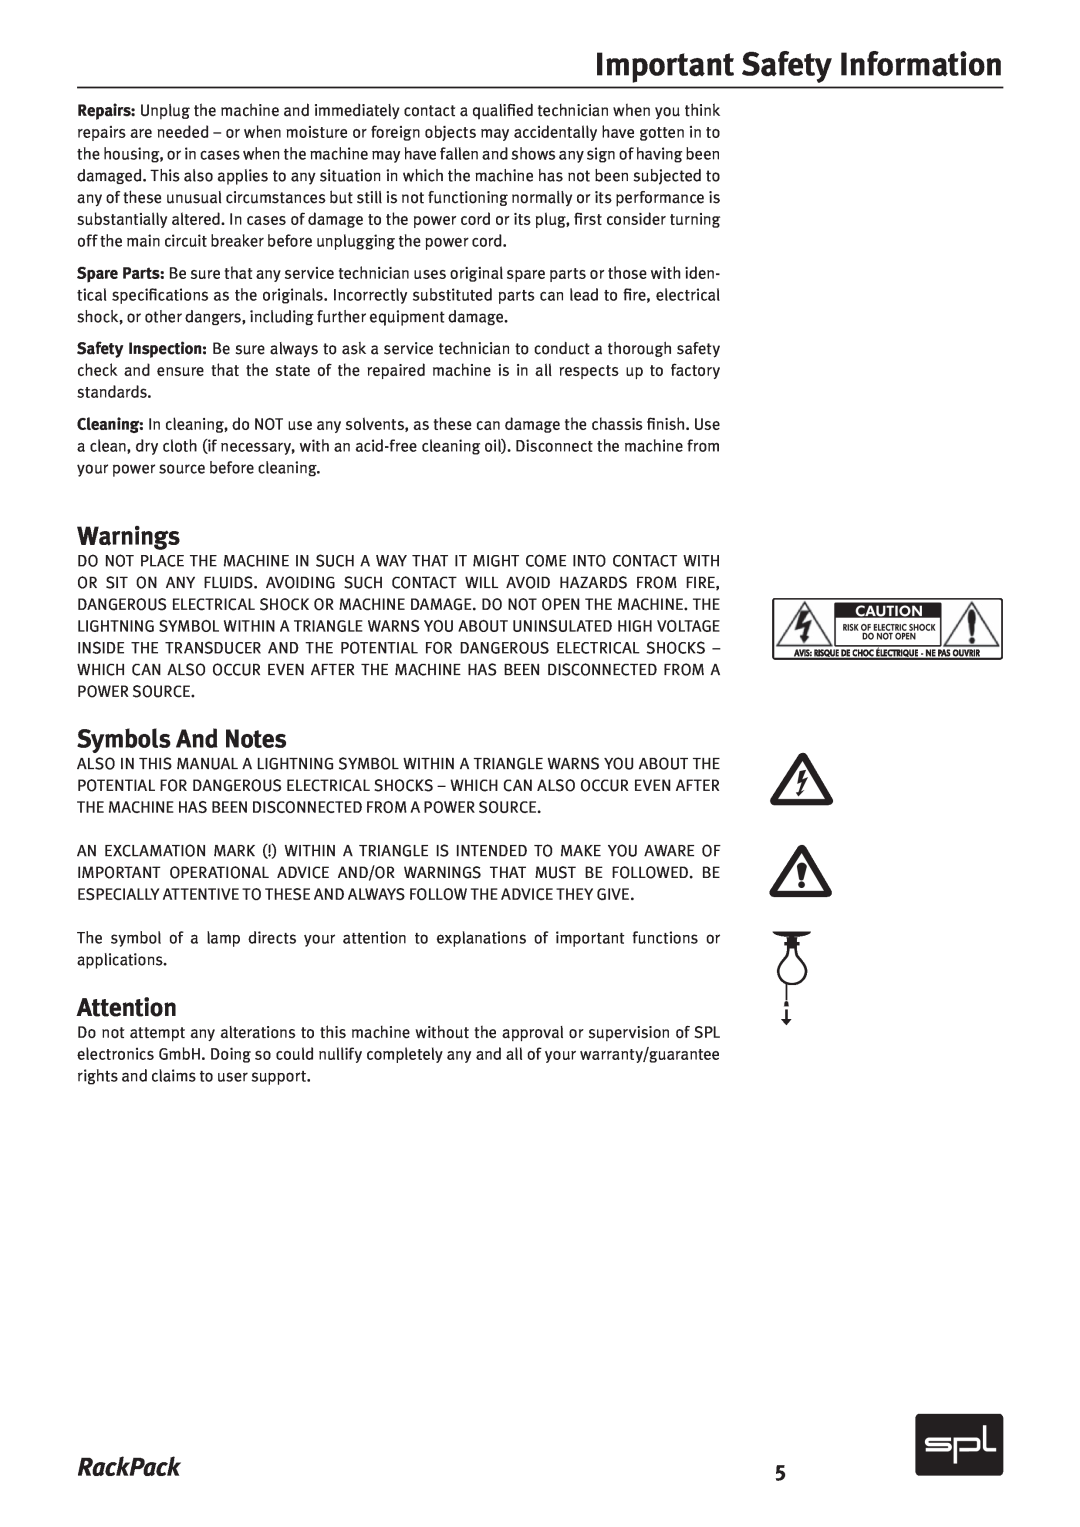 Sound Performance Lab 2710 manual Warnings, Symbols And Notes, Important Safety Information, RackPack 